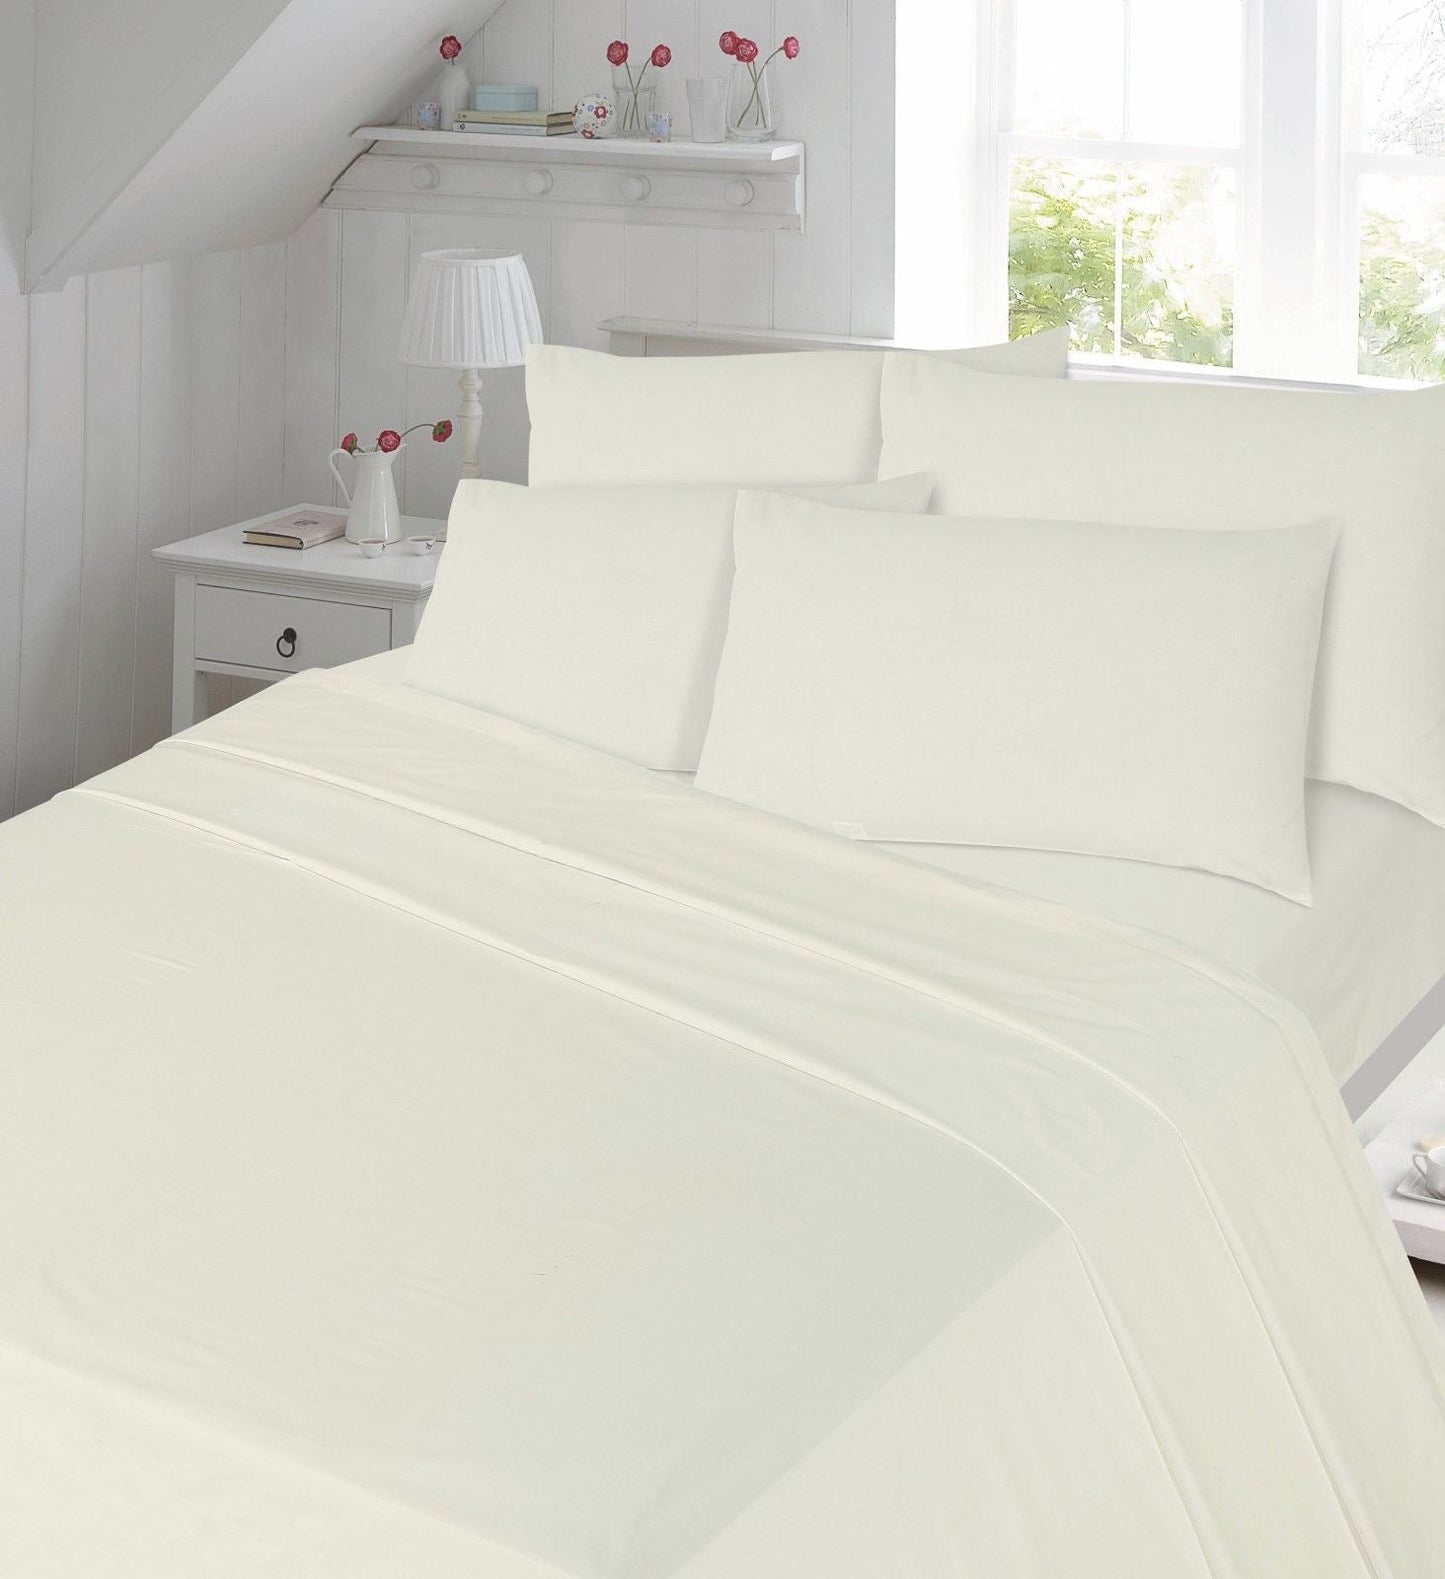 Flannelette Fitted Sheet Cotton Thermal With FREE MATCHING PILLOWCASE - TheComfortshop.co.ukBed Sheets0721718966548thecomfortshopTheComfortshop.co.ukFLNT FIT FREE PP Cream SingleCreamFitted Sheet Single OnlyFlannelette Fitted Sheet Cotton Thermal With FREE MATCHING PILLOWCASE - TheComfortshop.co.uk